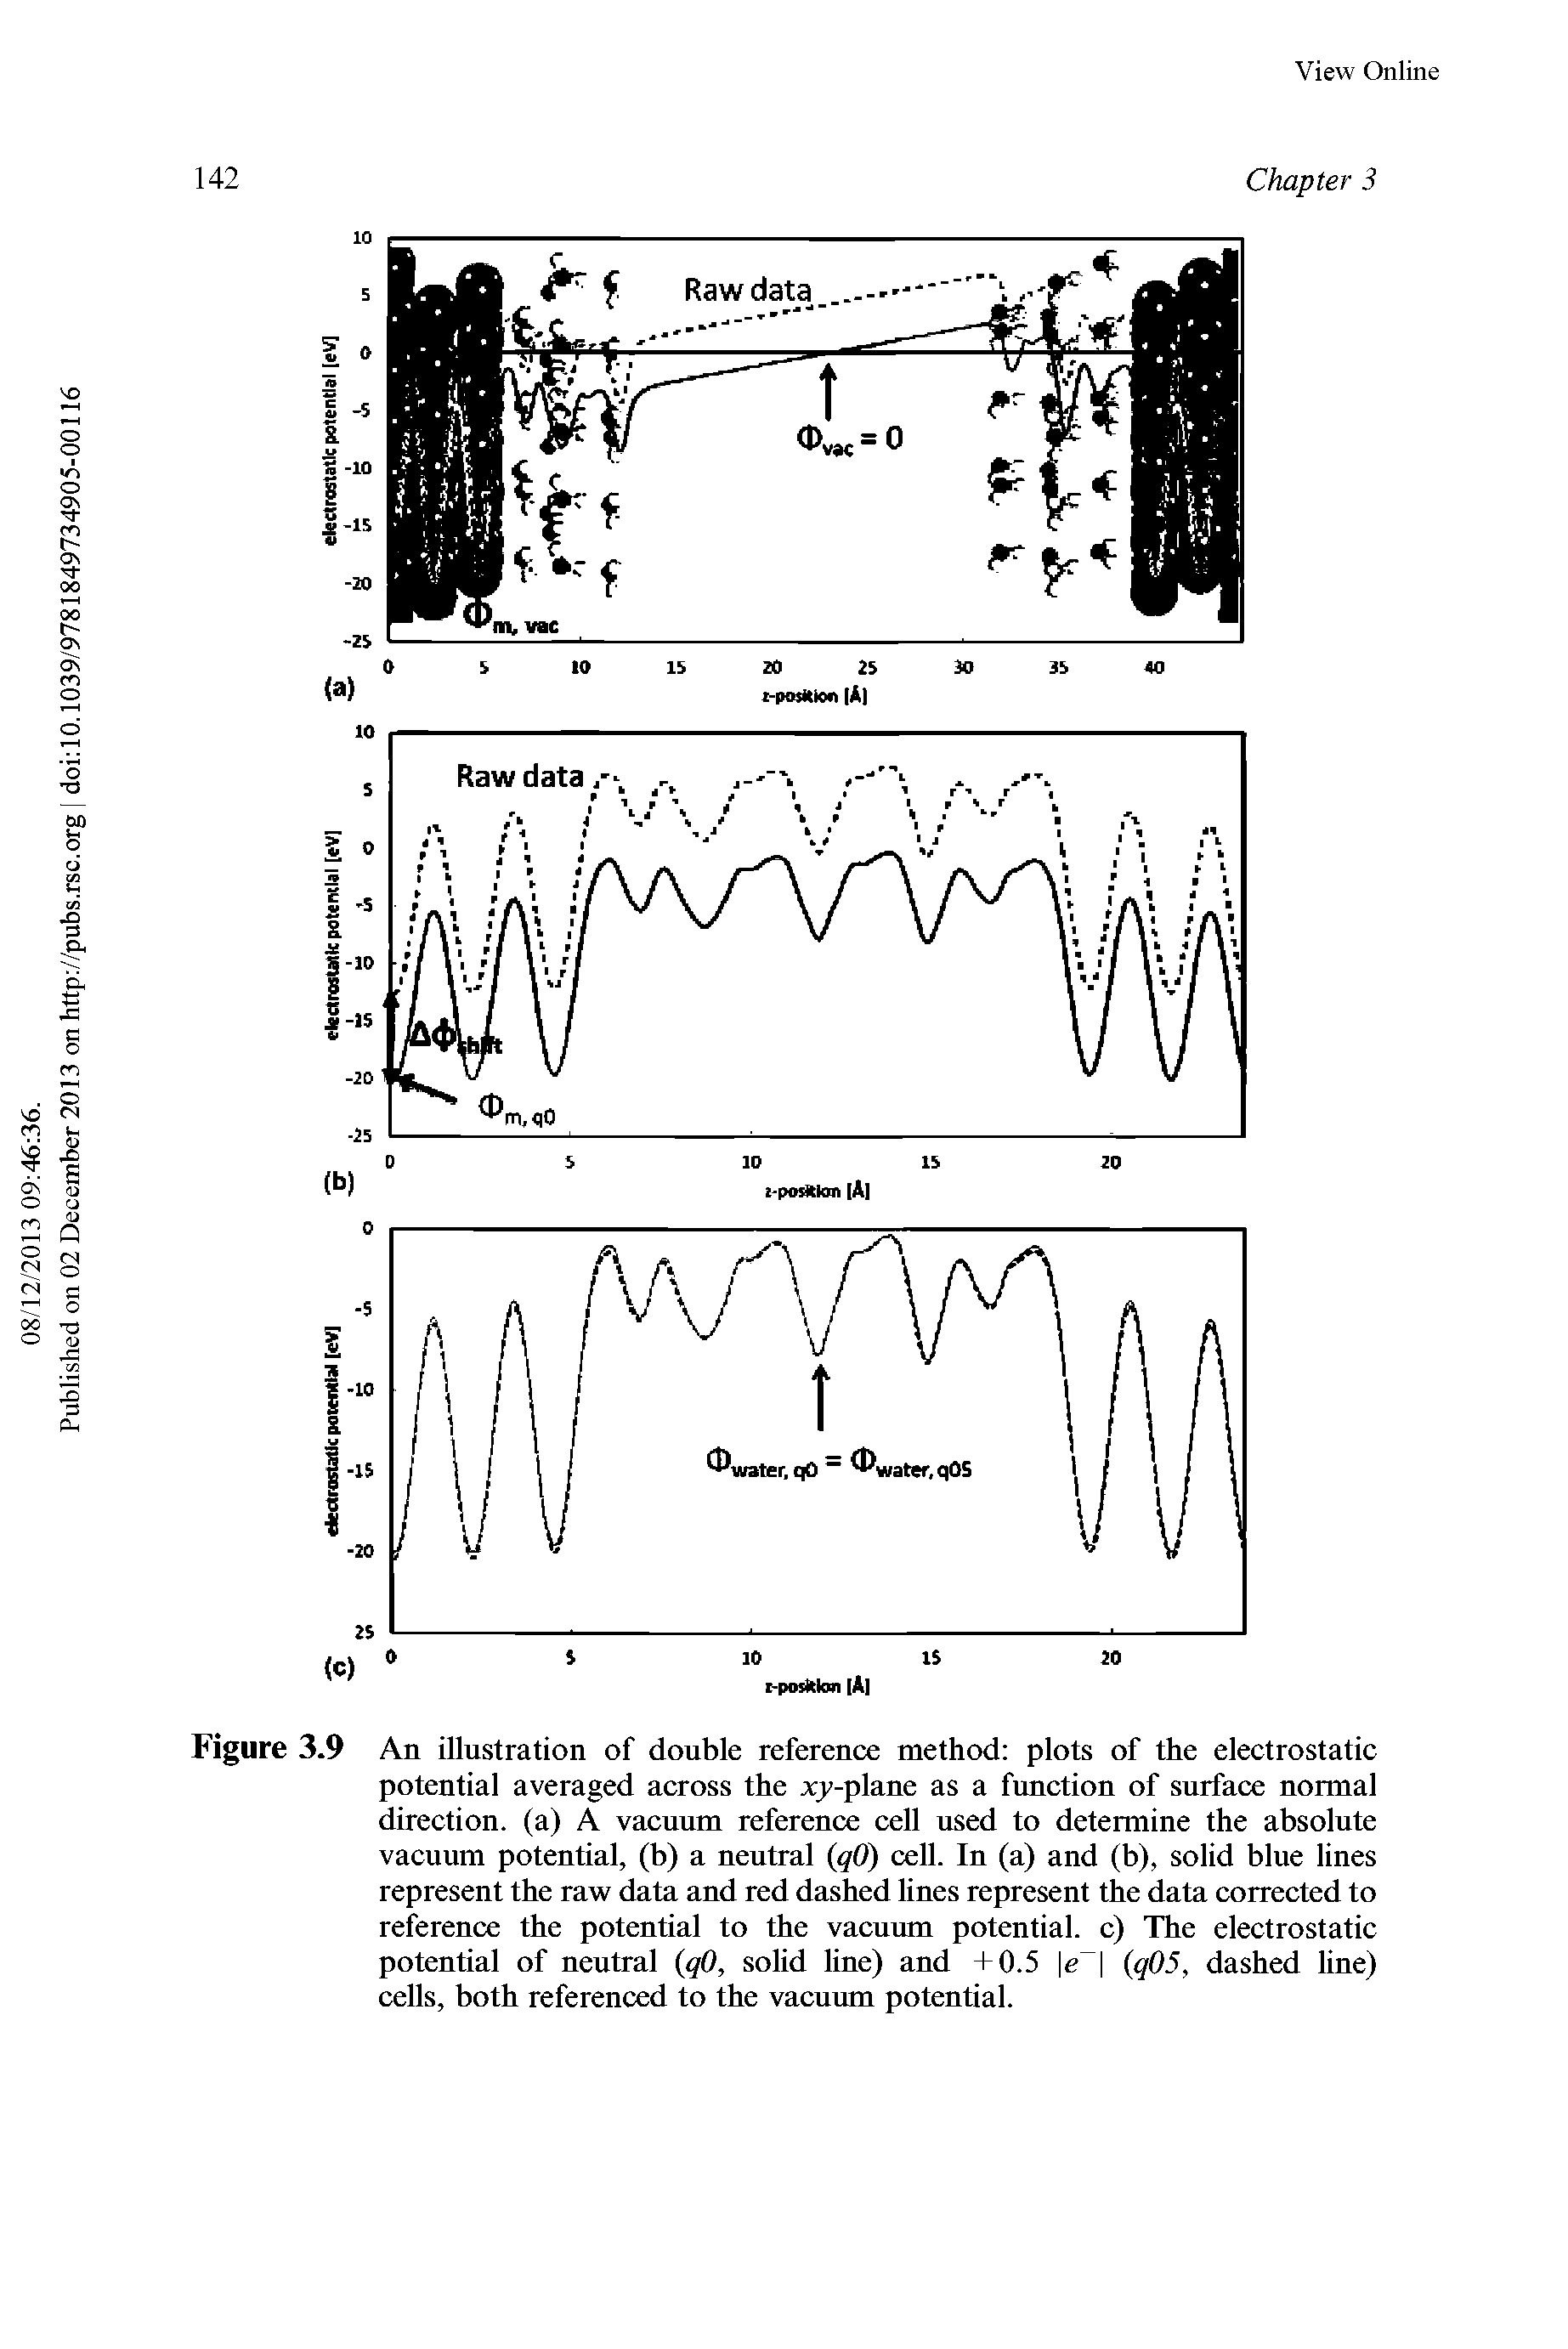 Figure 3.9 An illustration of double reference method plots of the electrostatic potential averaged across the xj -plane as a function of surface normal direction, (a) A vacuum reference cell used to determine the absolute vacuum potential, (b) a neutral (qO) cell. In (a) and (b), solid blue lines represent the raw data and red dashed lines represent the data corrected to reference the potential to the vacuum potential, c) The electrostatic potential of neutral (qO, solid line) and +0.5 e (q05, dashed line) cells, both referenced to the vacuum potential.